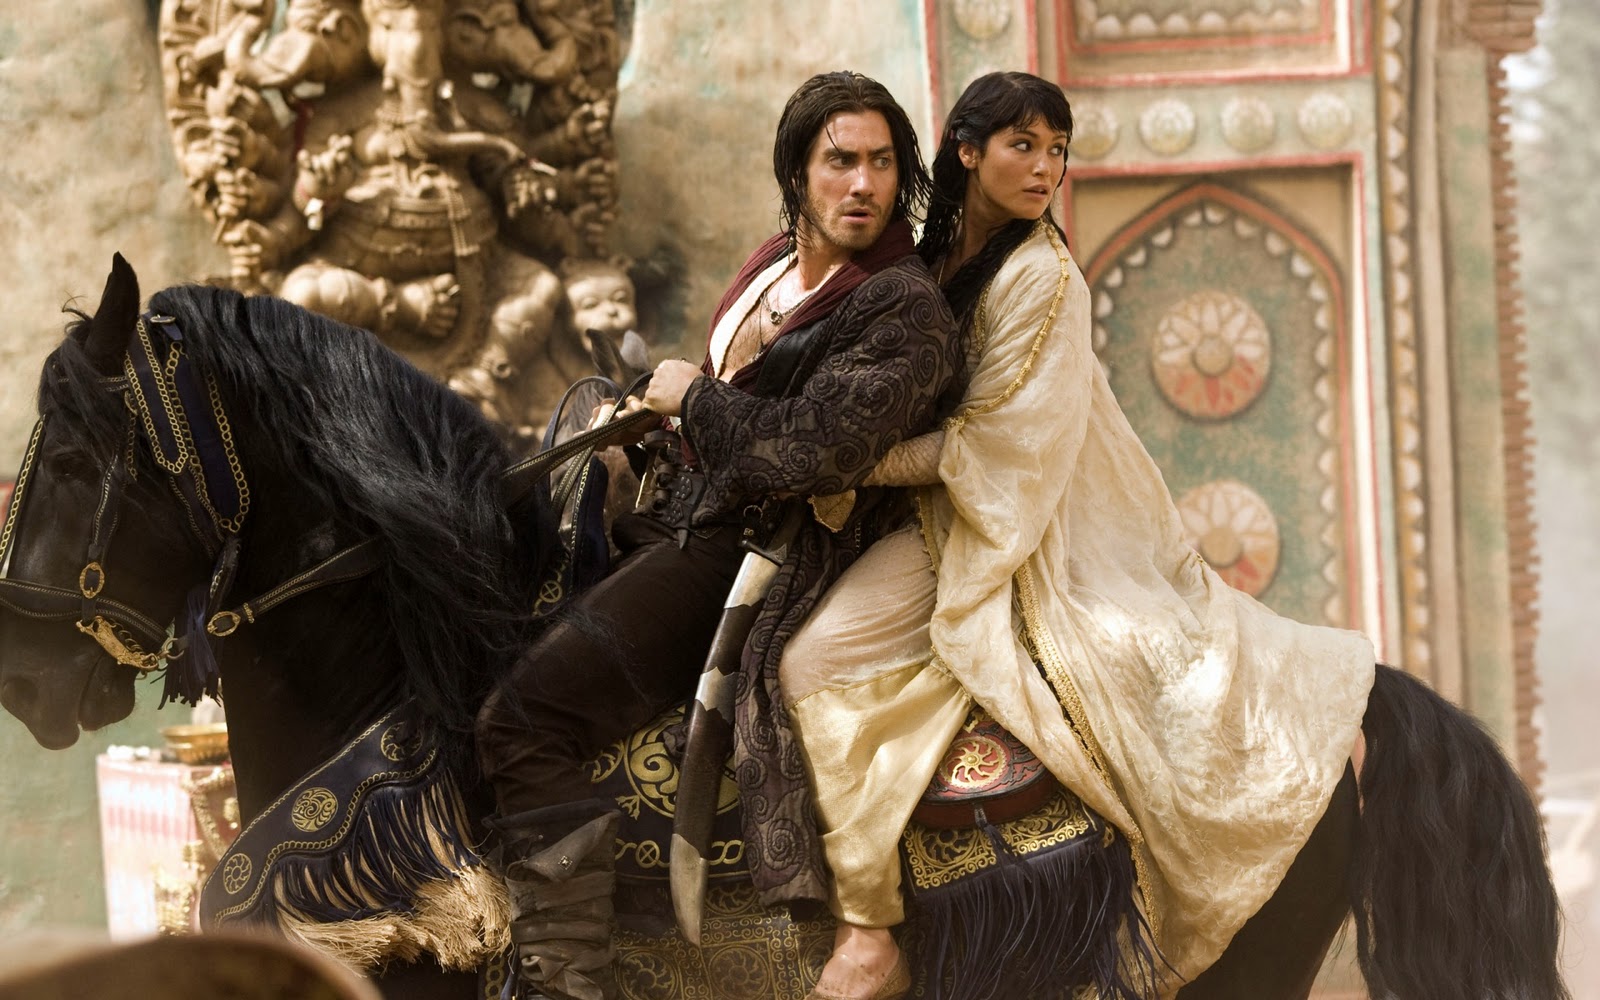 prince of persia movie online free hd